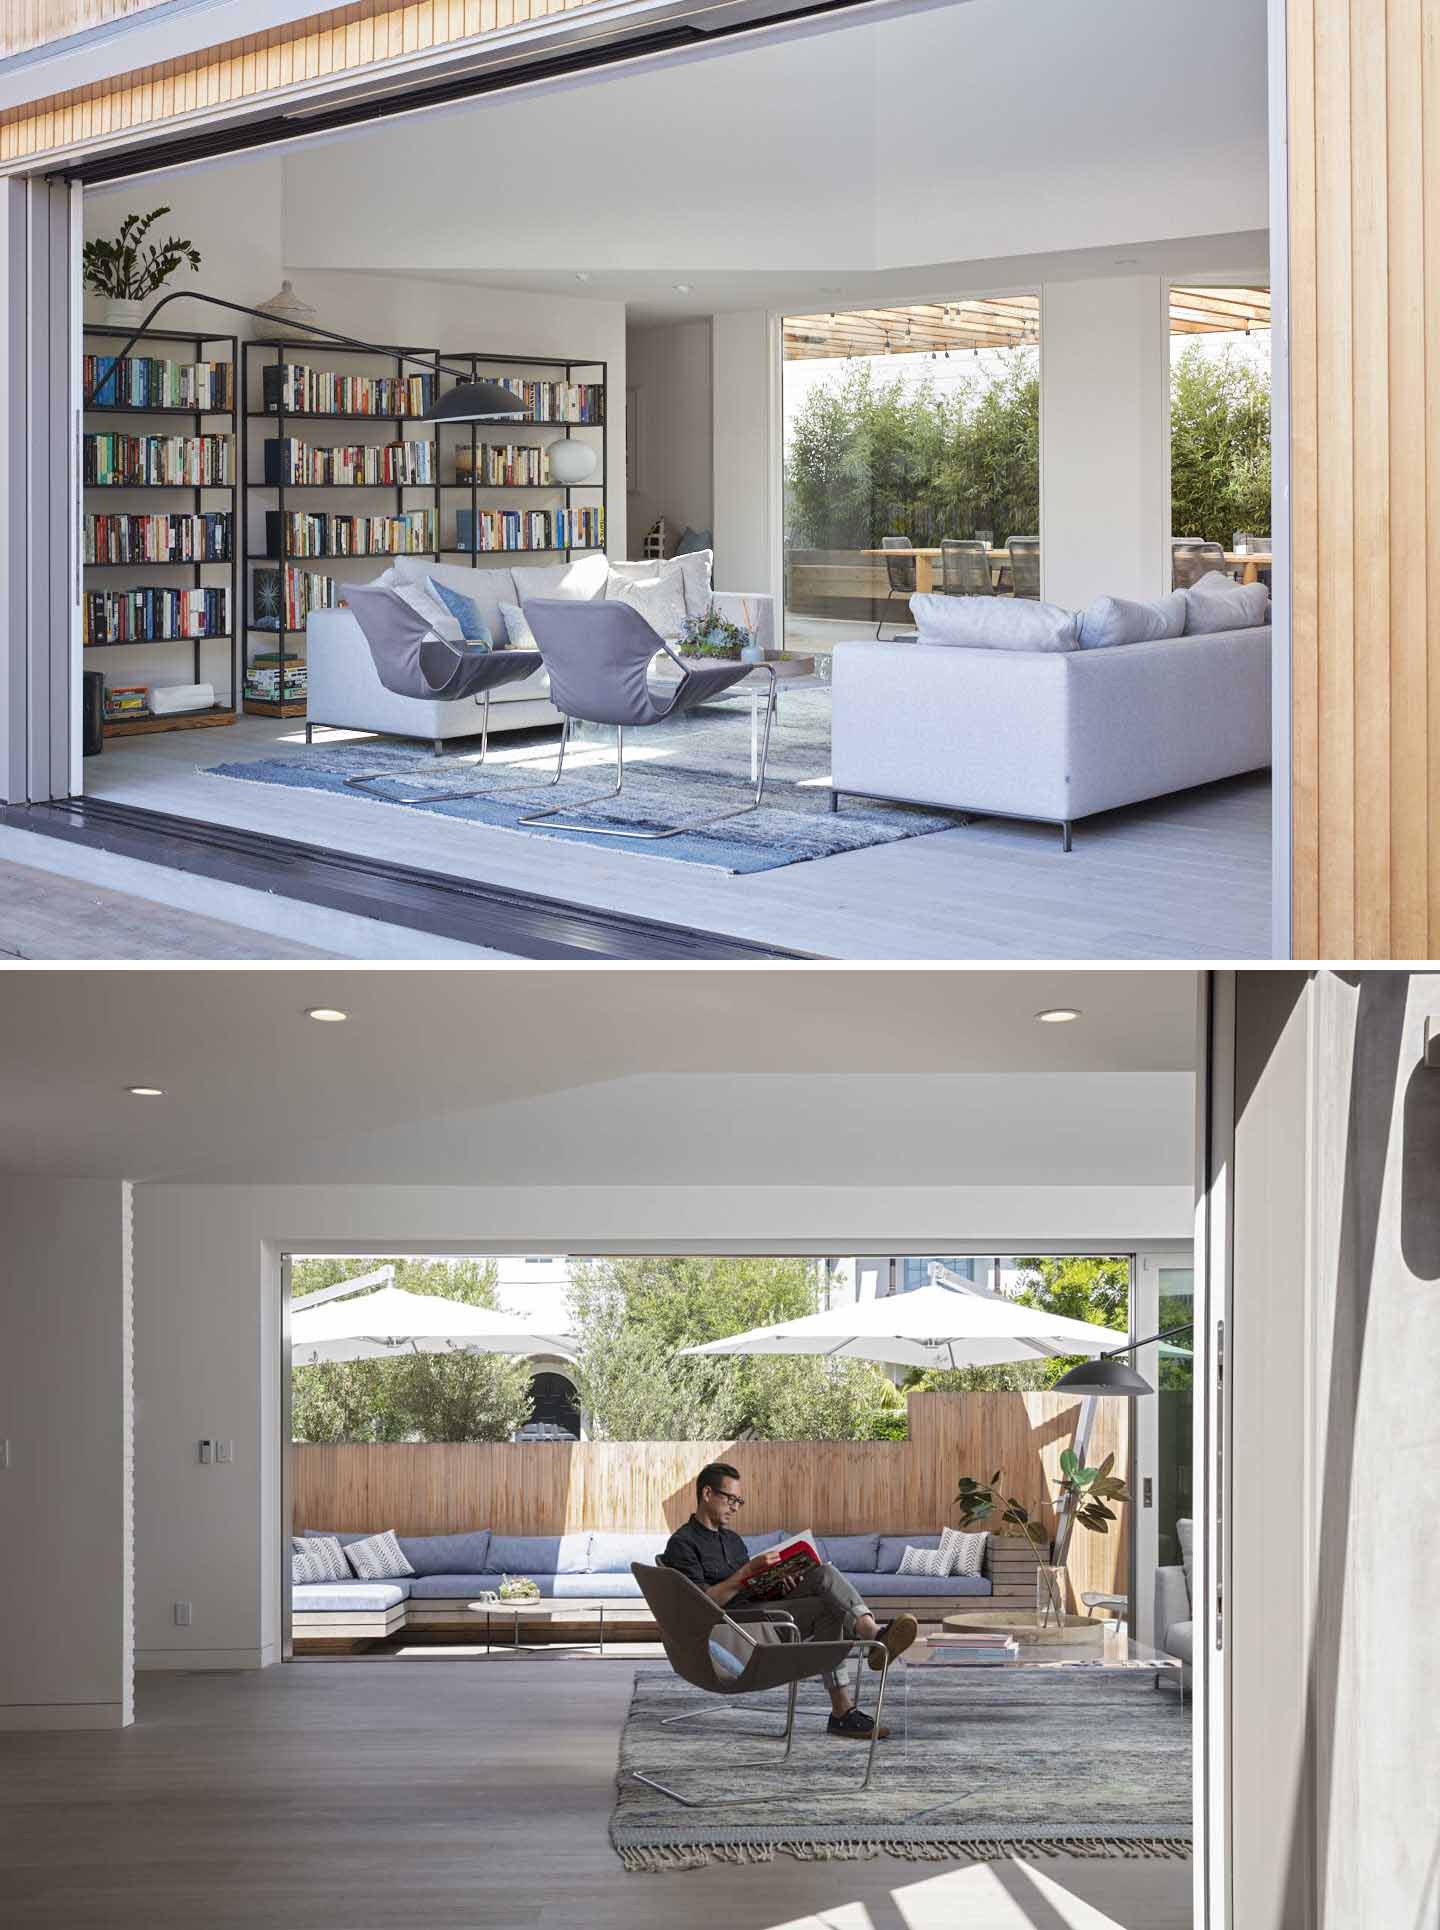 The living room has two large slider doors that invite ample light inside while connecting to outdoor ،es.